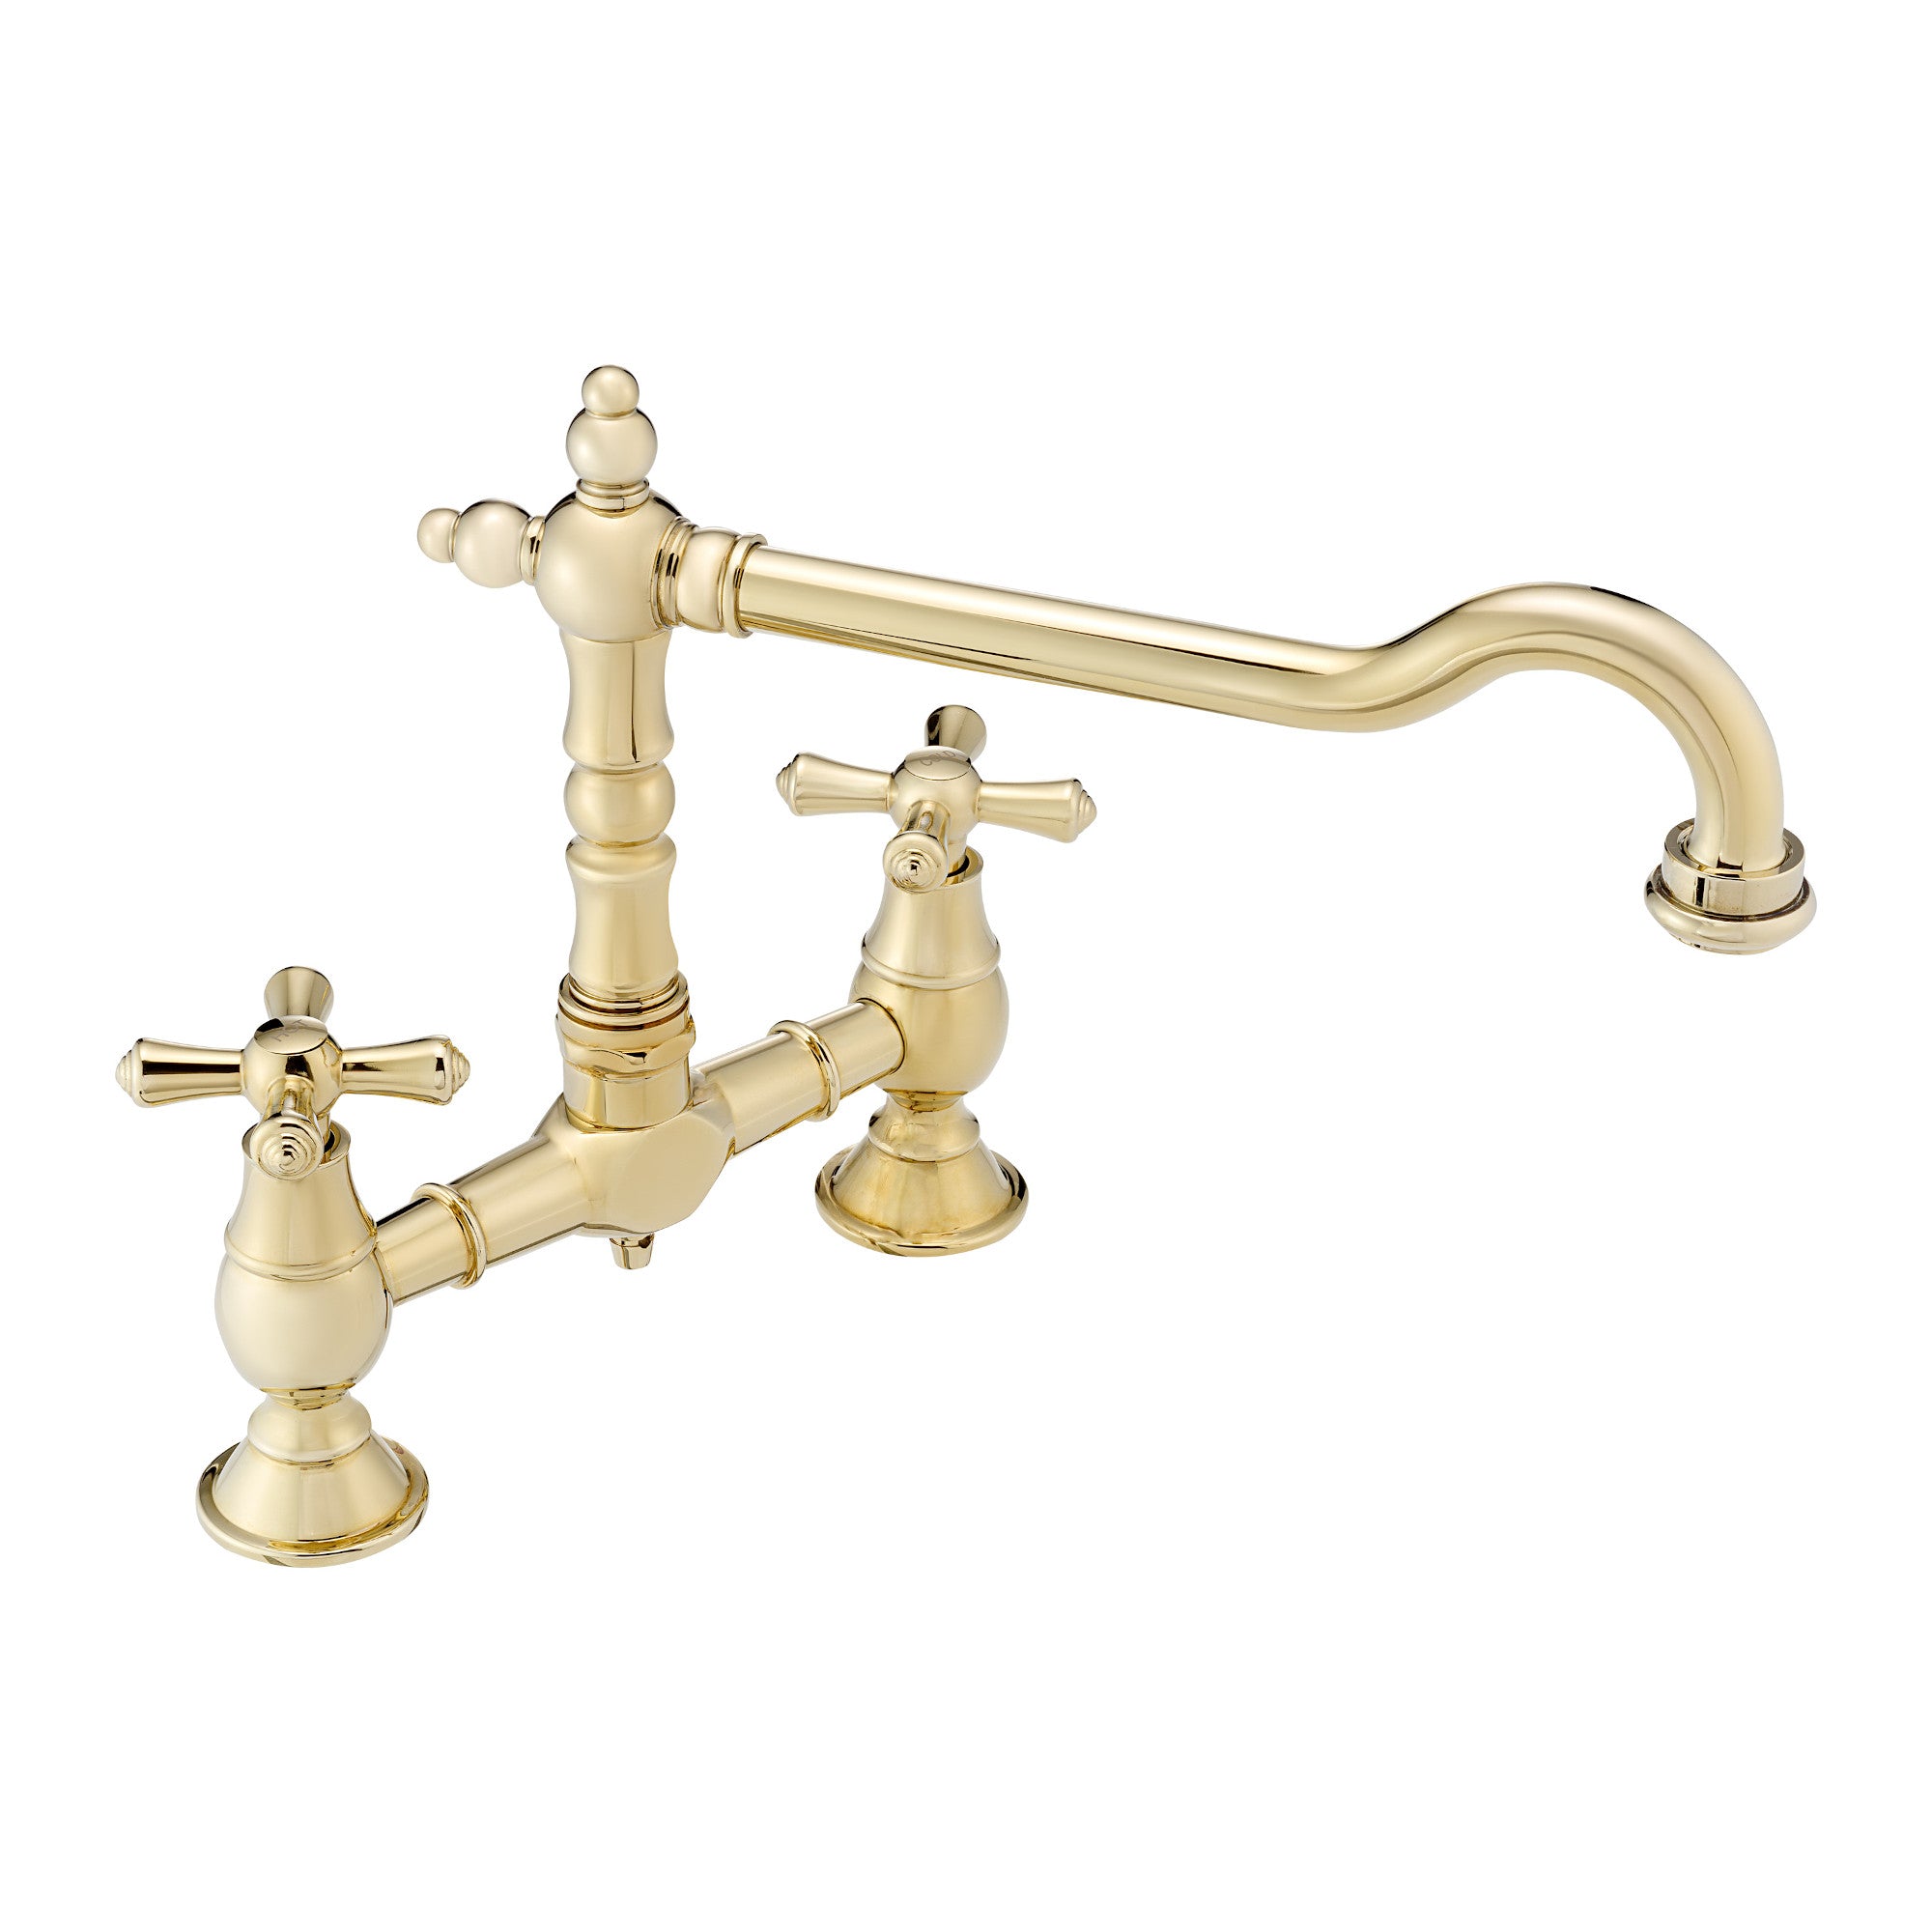 Langley traditional bridge kitchen sink mixer tap colonial crosshead - gold